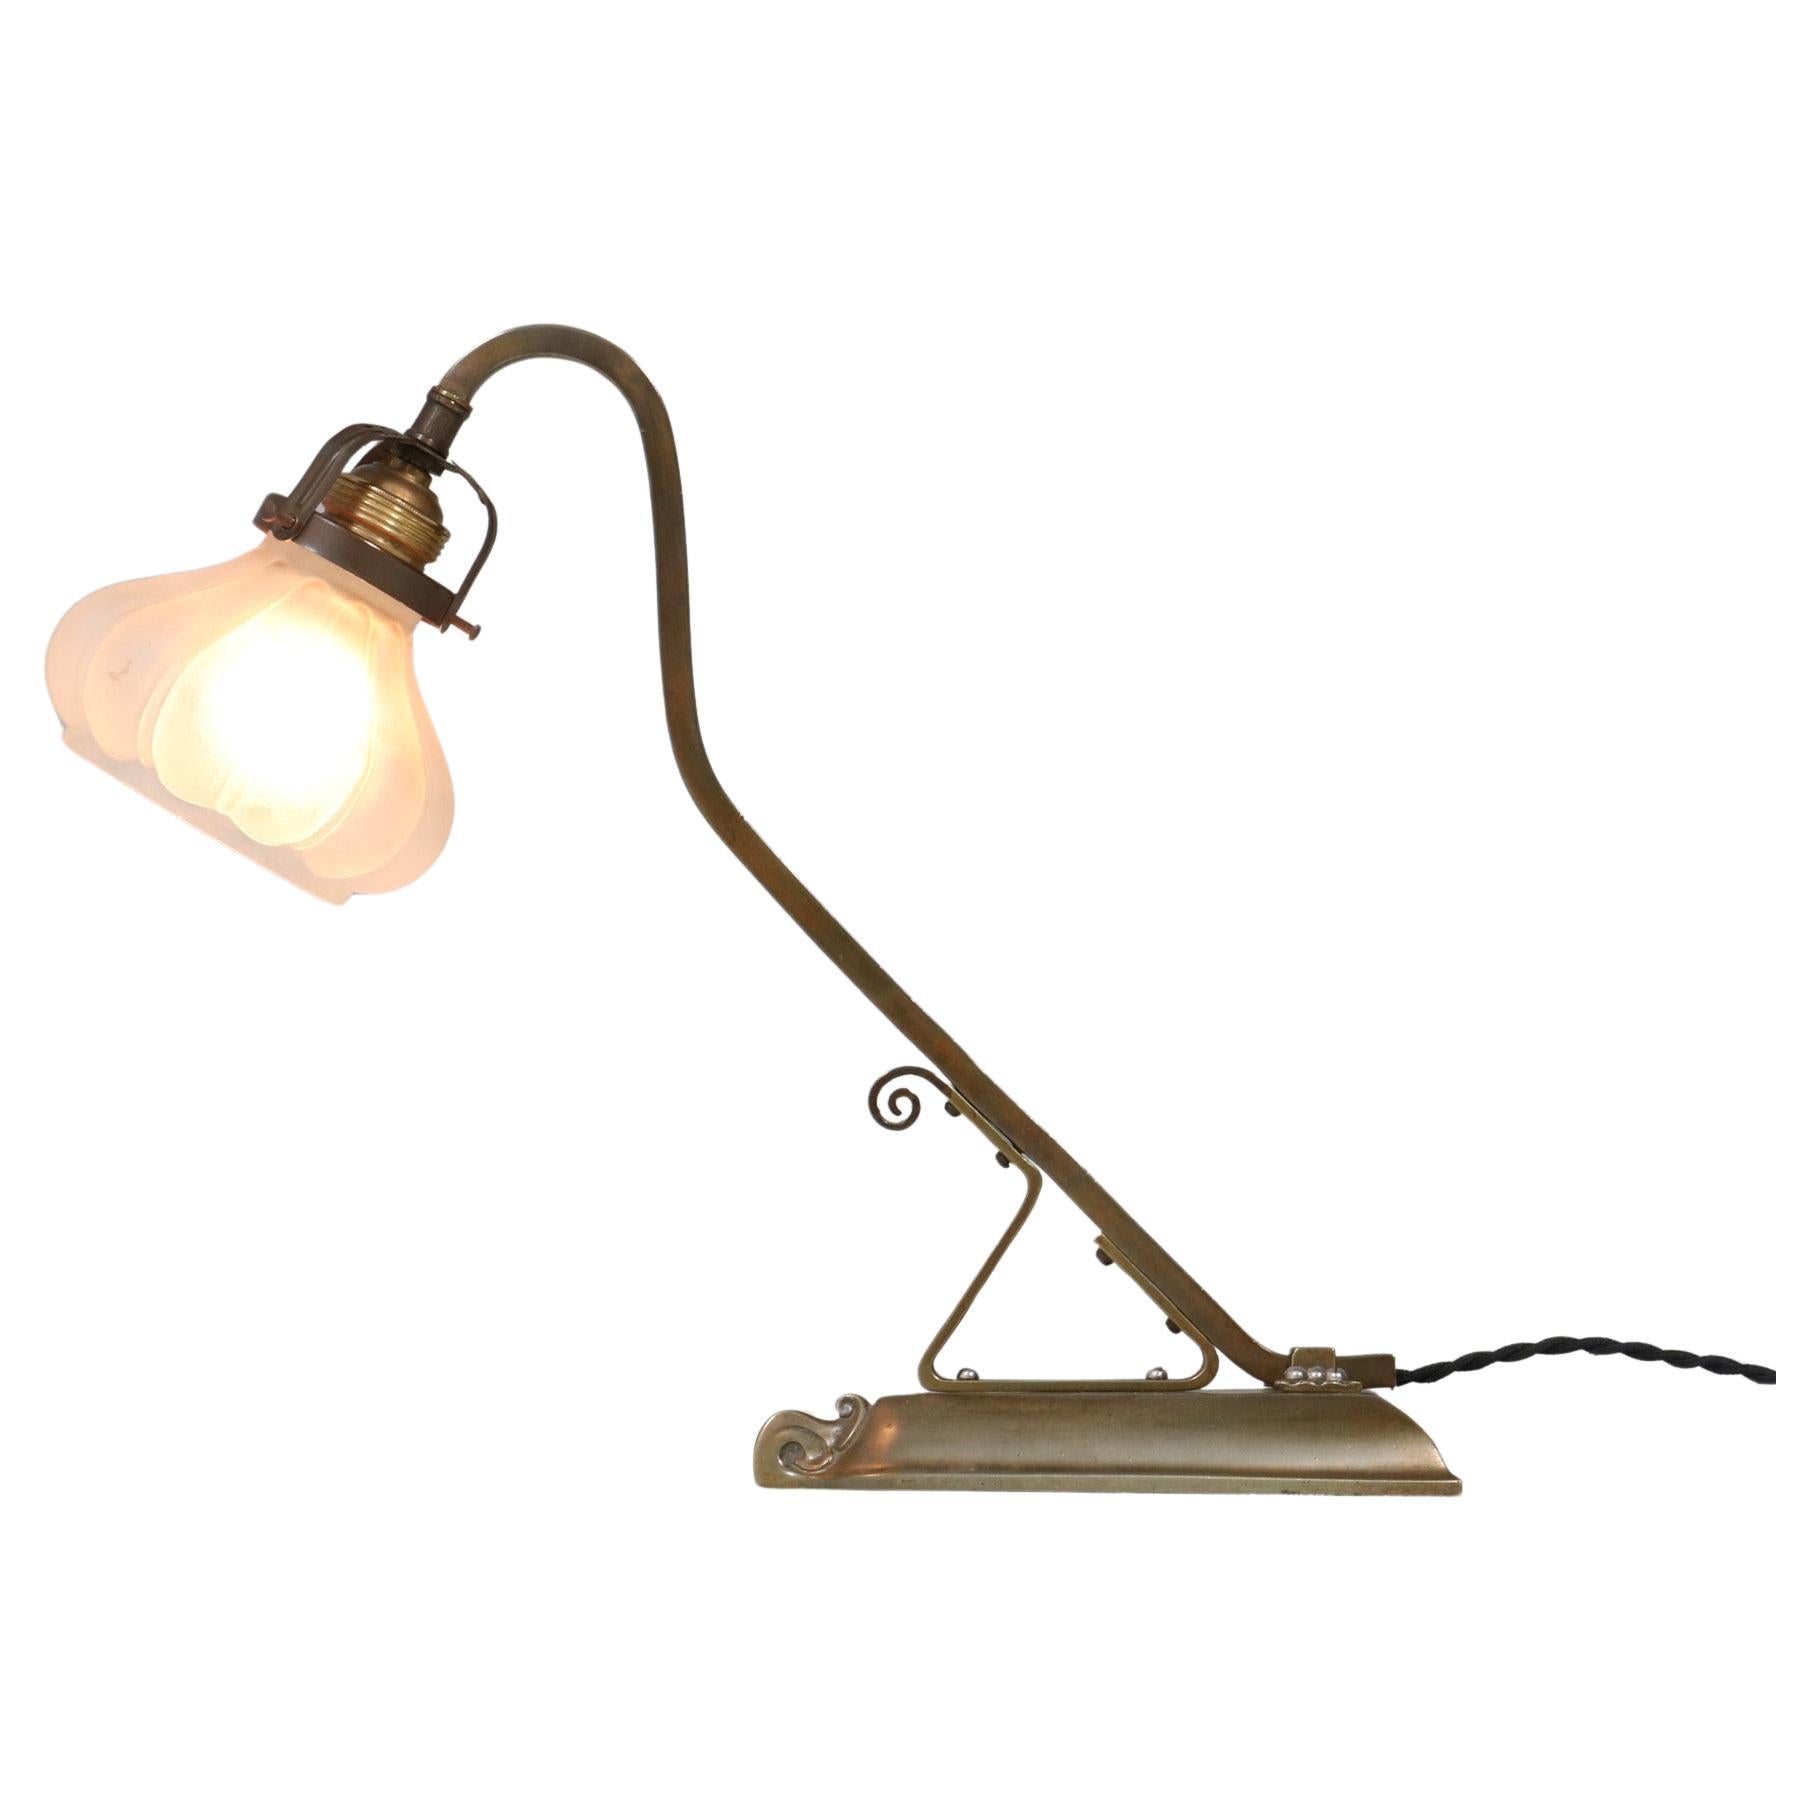  Patinated Brass Art Nouveau Table Lamp or Desk Lamp, 1900s For Sale